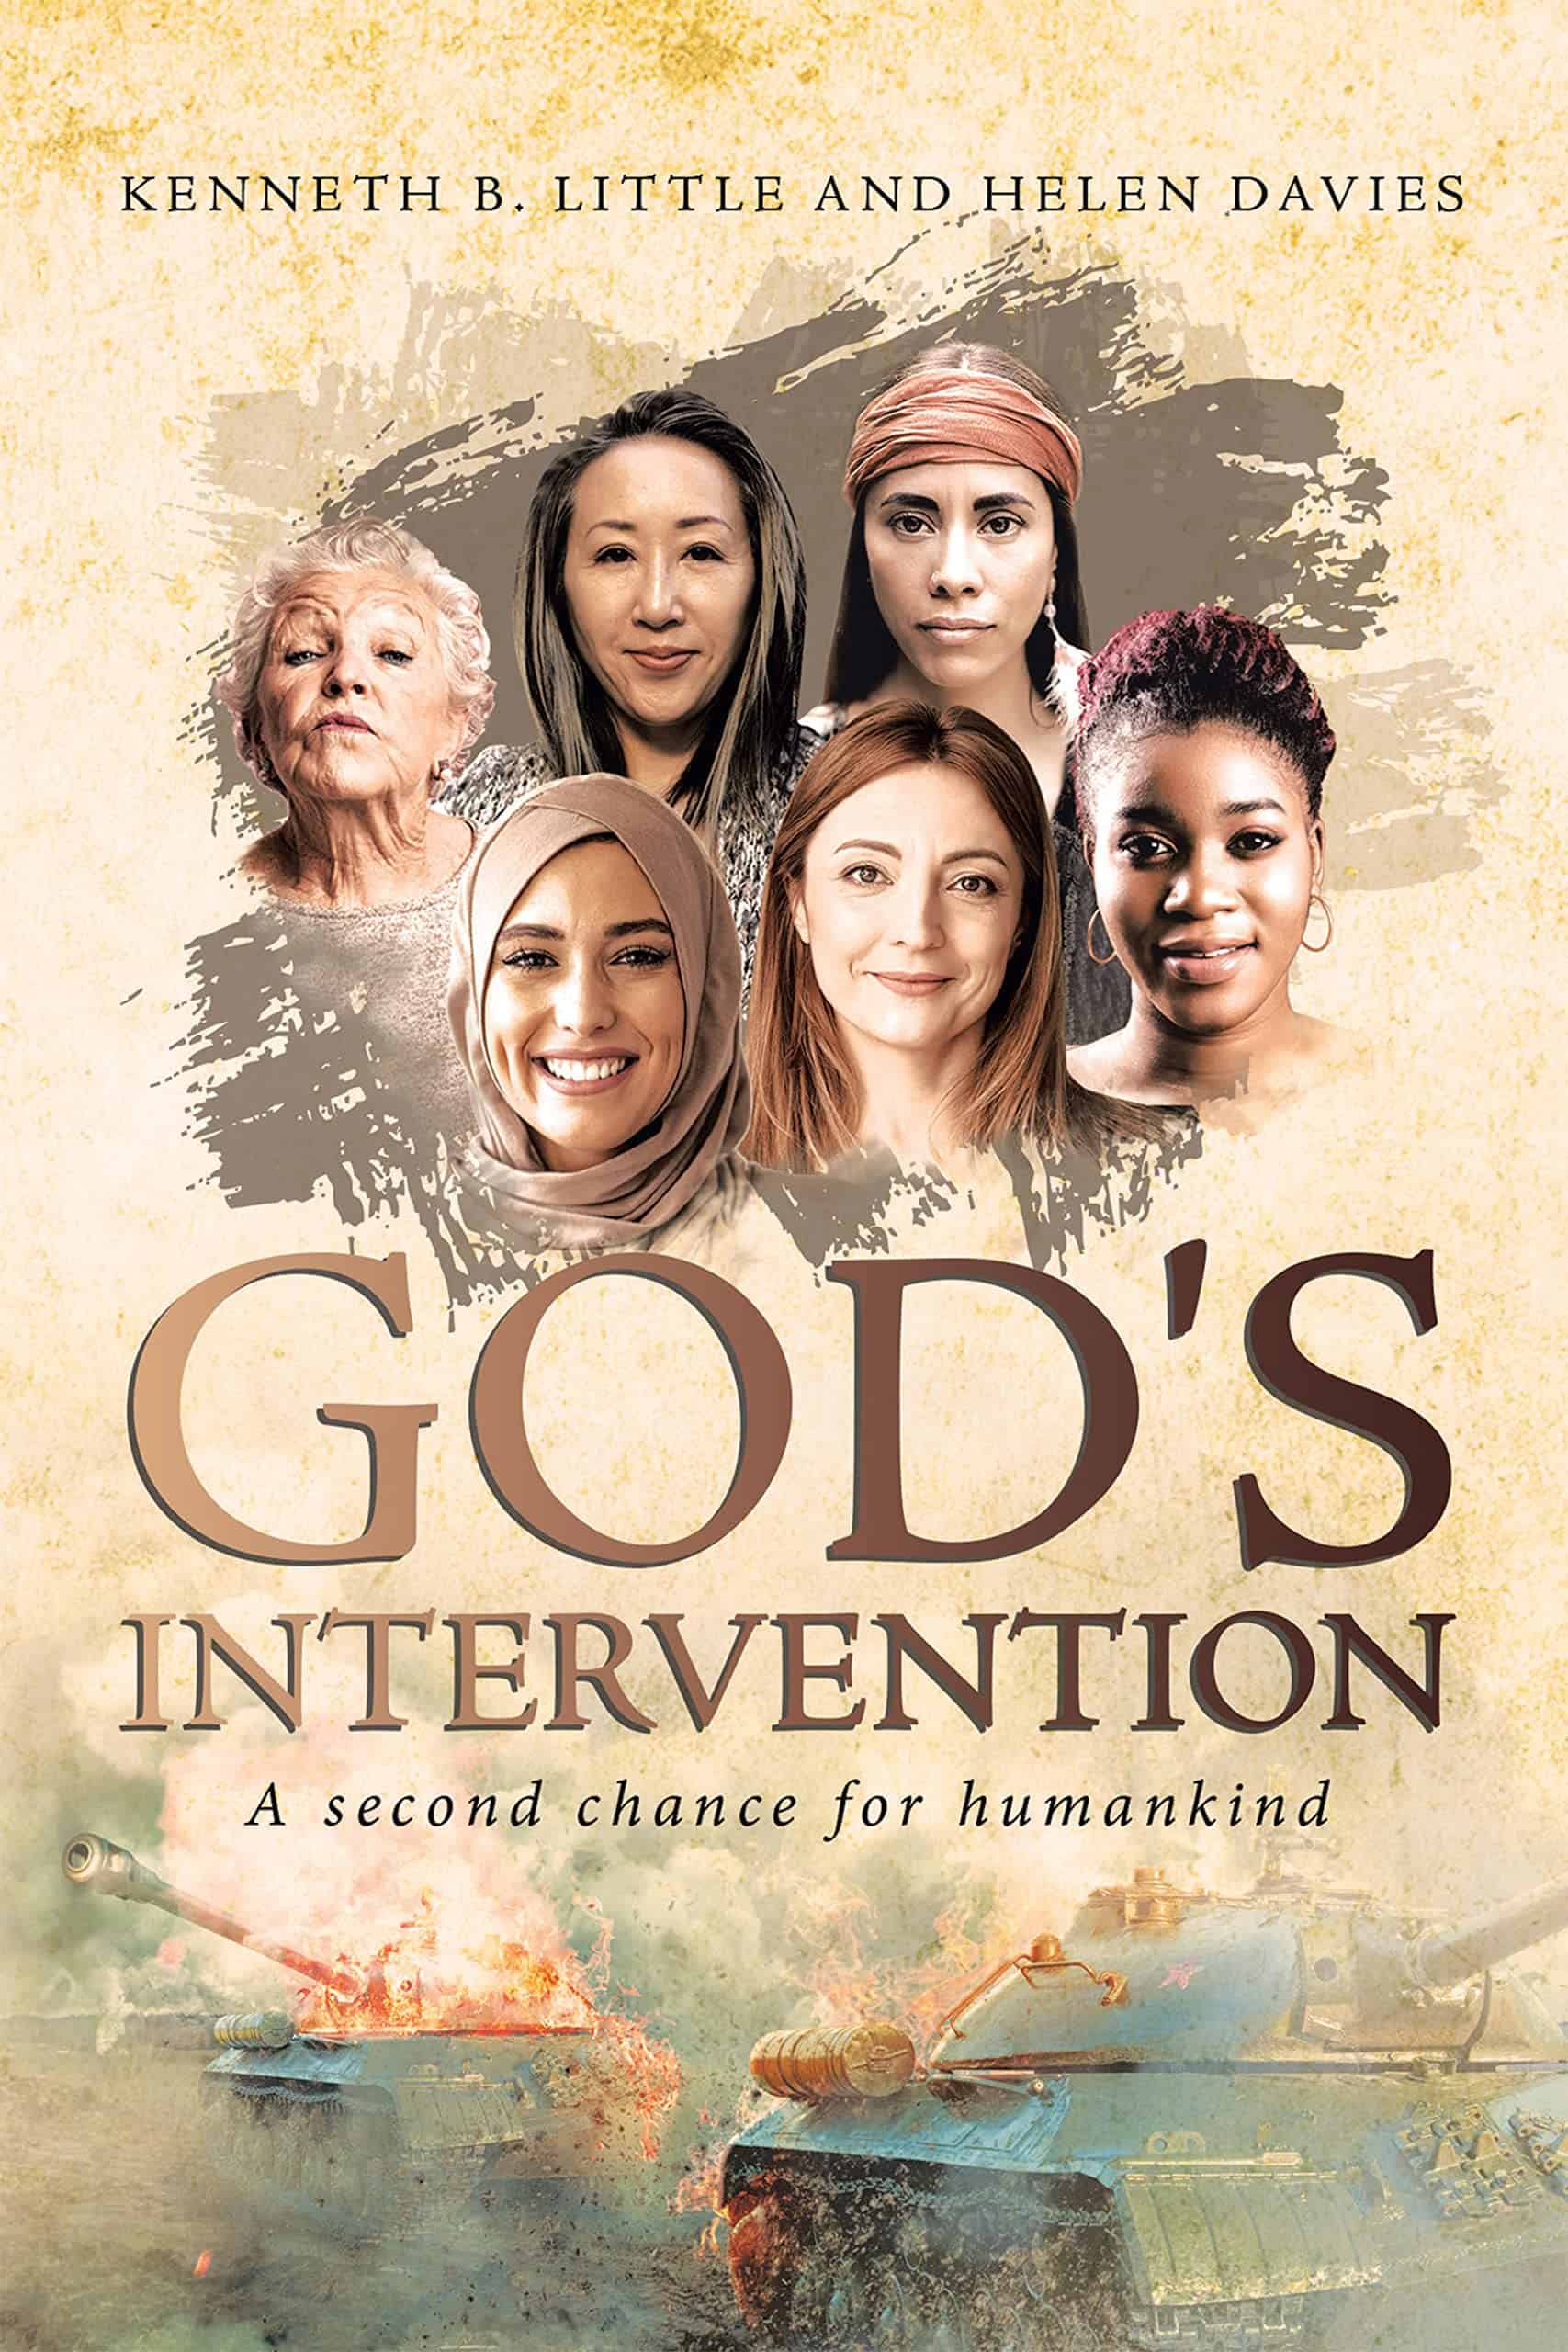 God's Intervention book cover image